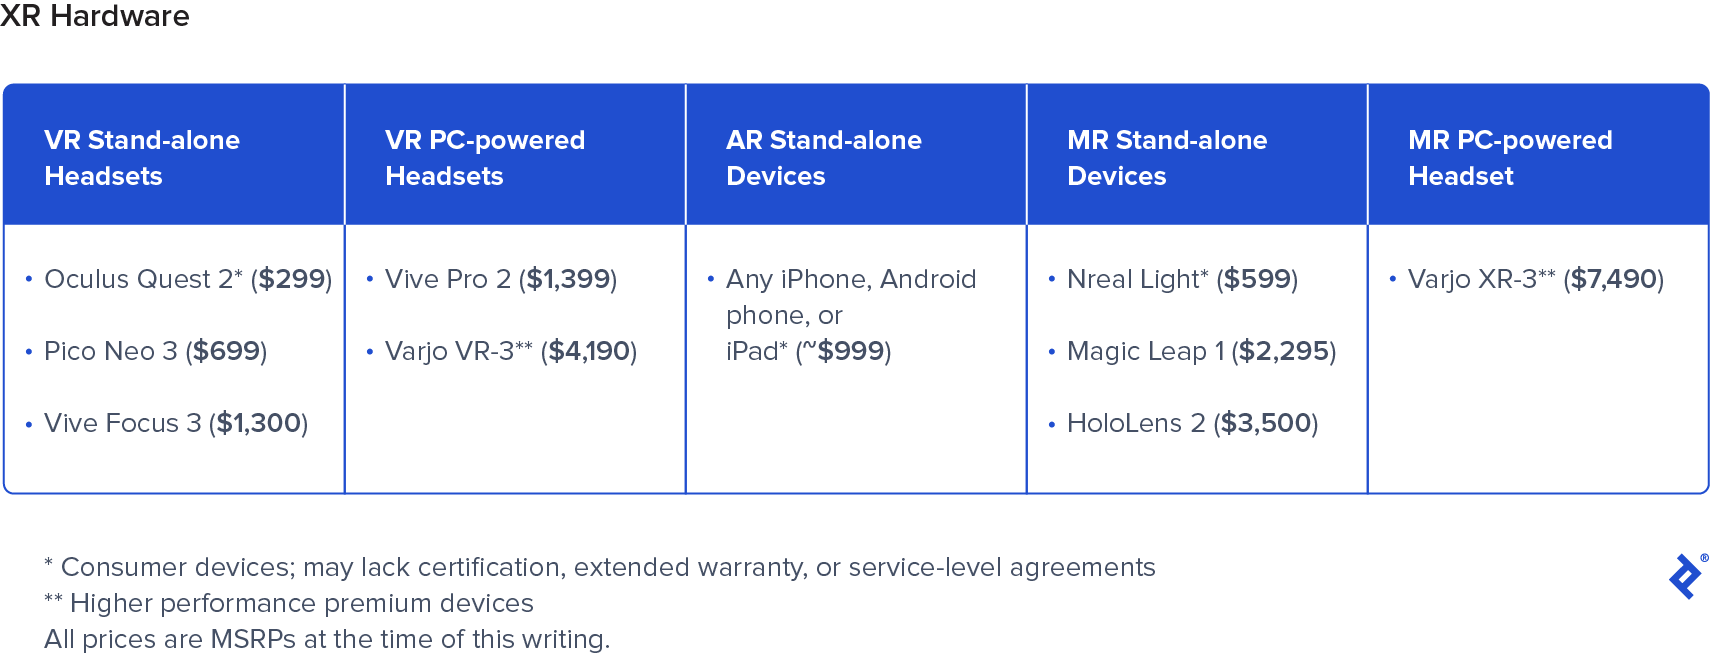 A table titled "XR Hardware." There are five columns. The first column, "VR Stand-alone Headsets" has three bulleted items, "Oculus Quest 2* ($299)," "Pico Neo 3 ($699)," and "Vive Focus 3 ($1,300)." The second column, "VR PC-powered Headsets" has two bulleted items, "Vive Pro 2 ($1,399)" and "Varjo VR-3** ($4,190)." The third column, "AR Stand-alone Devices," has one bulleted item, "Any iPhone, Android phone, or iPad* (~$999)." The fourth column, "MR Stand-alone Devices," has three bulleted items, "Nreal Light" ($599)," "Magic Leap 1 ($2,295)," and "HoloLens 2 ($3,500)." The fifth column, "MR PC-powered Headset," has one bulleted item, "Varjo XR-3** ($7,490)." There are three footnotes, "*Consumer devices; may lack certification, extended warranty, or service-level agreements," "**Higher performance premium devices," and "All prices are MSRPs at the time of this writing."